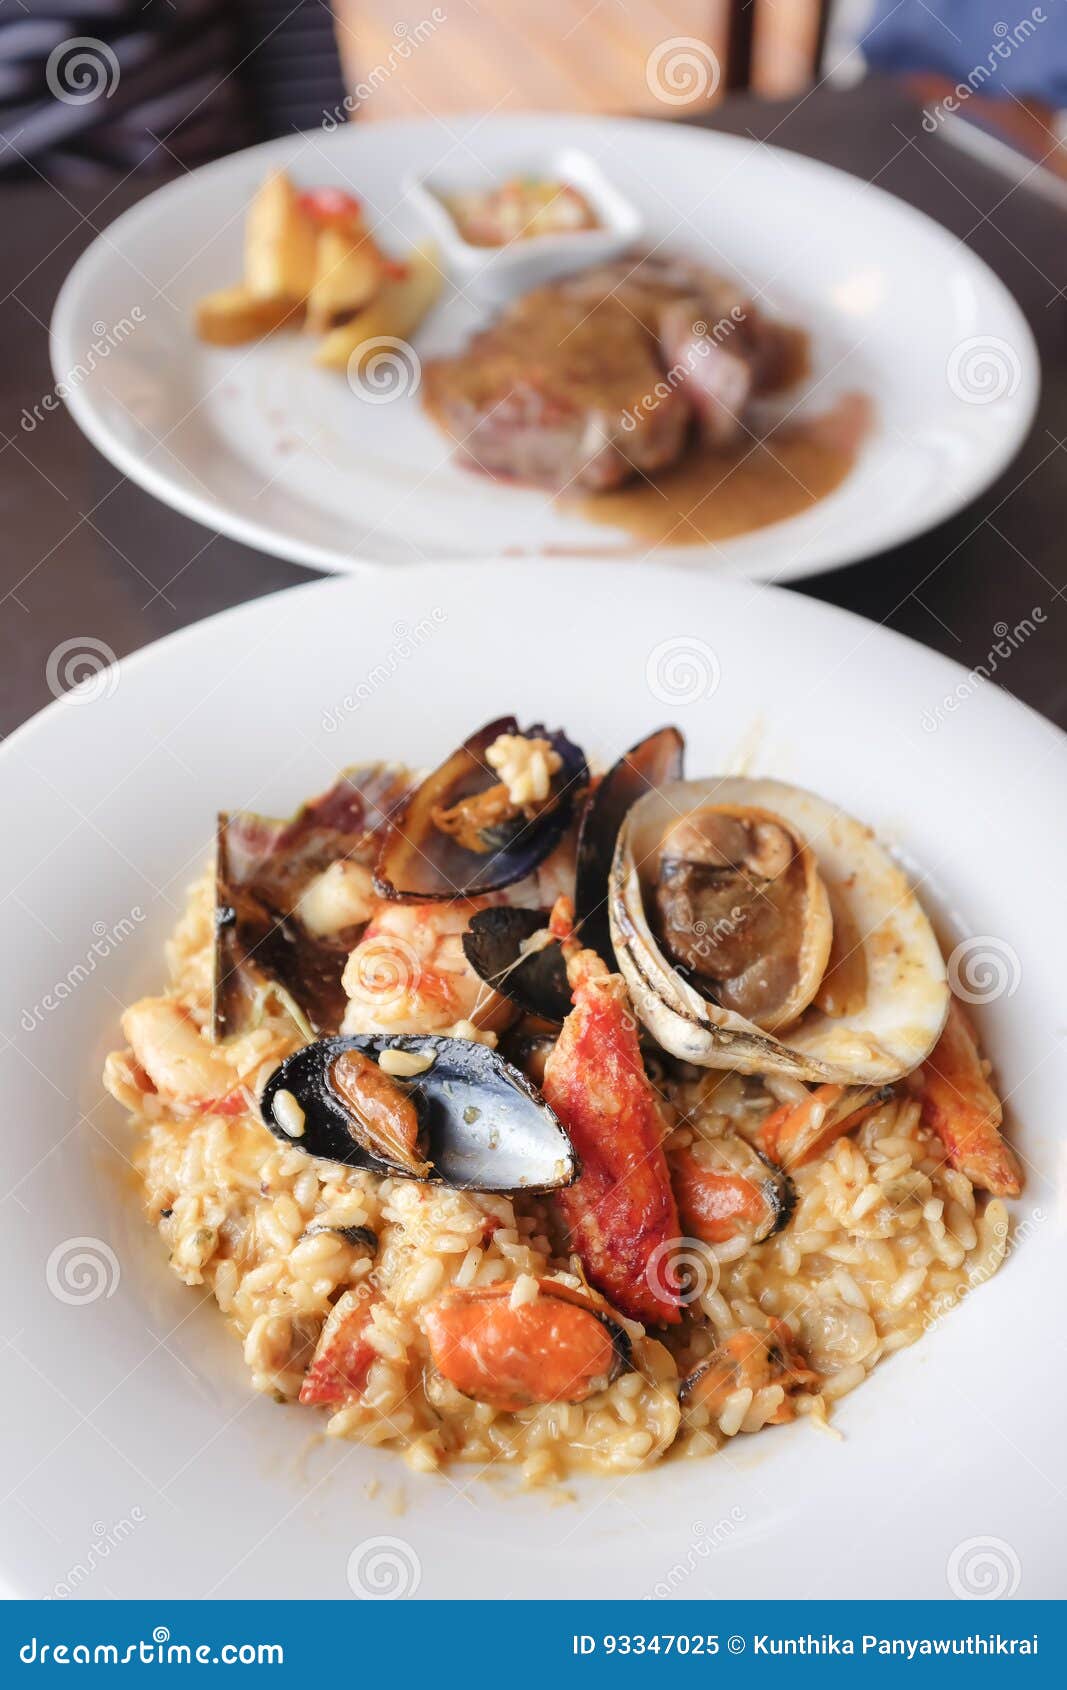 Seafood Risotto with Shrimp, Mussels, Lobster Stock Image - Image of ...